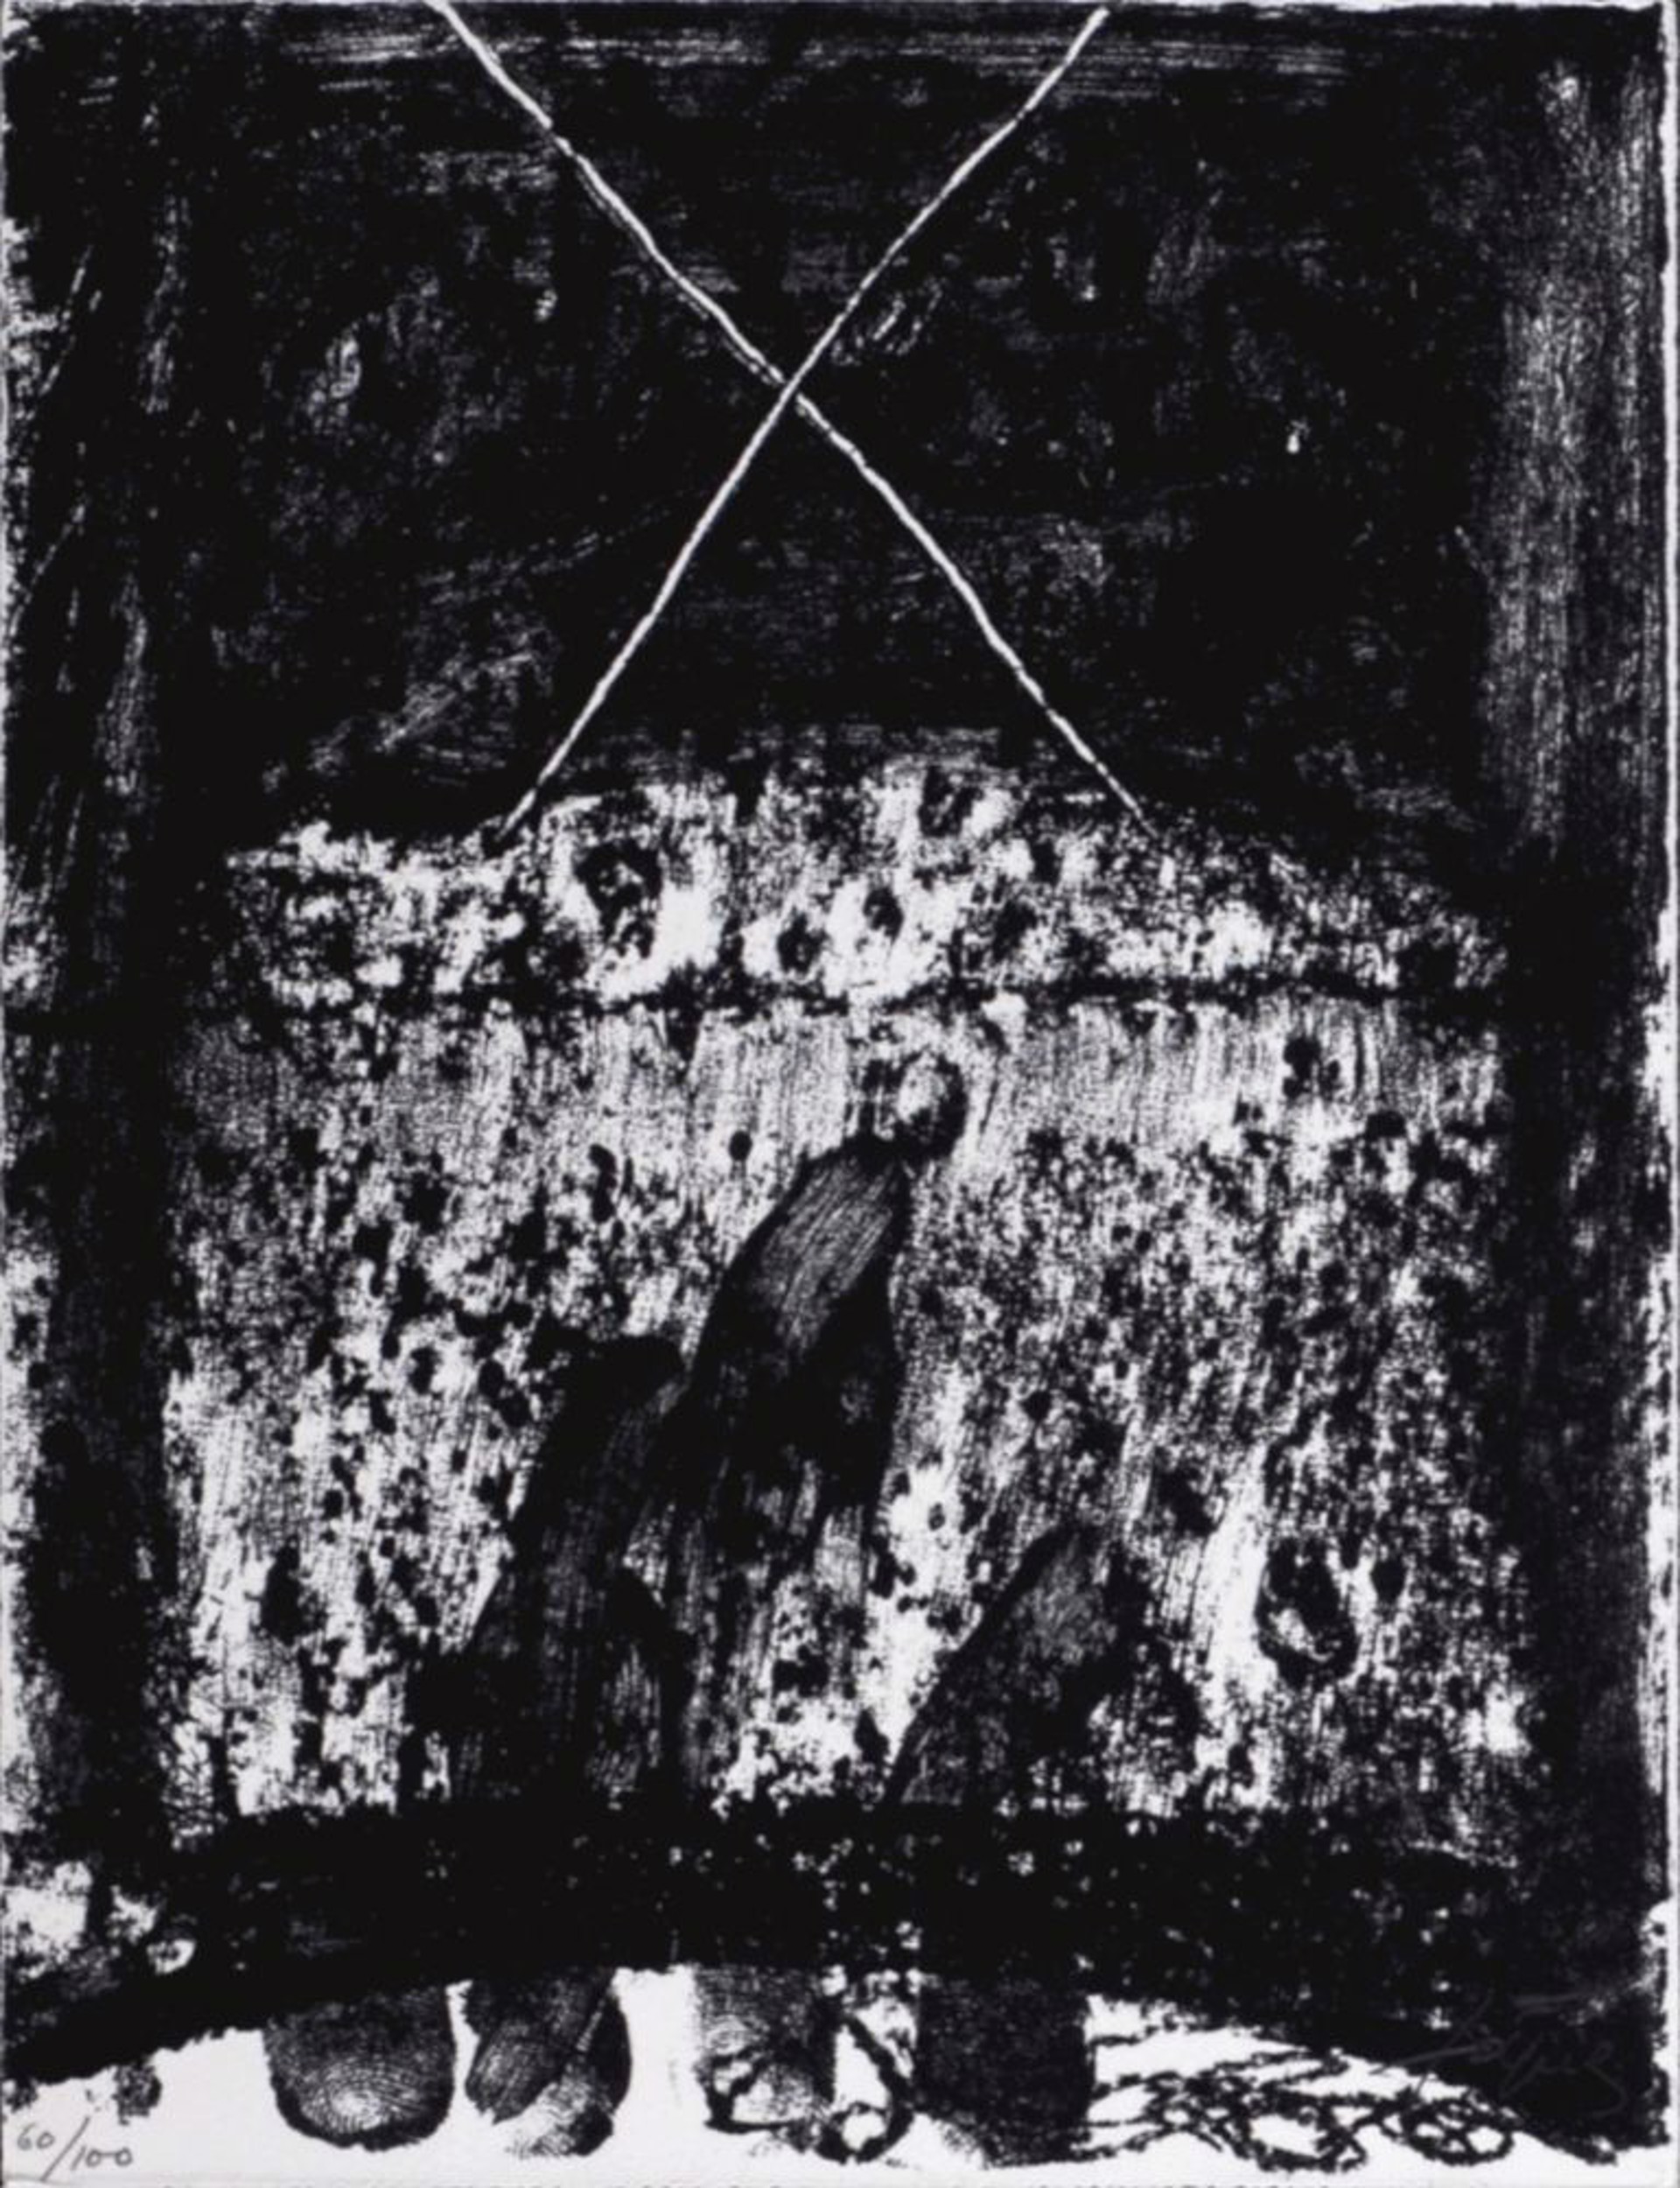 Composition by Antoni Tapies